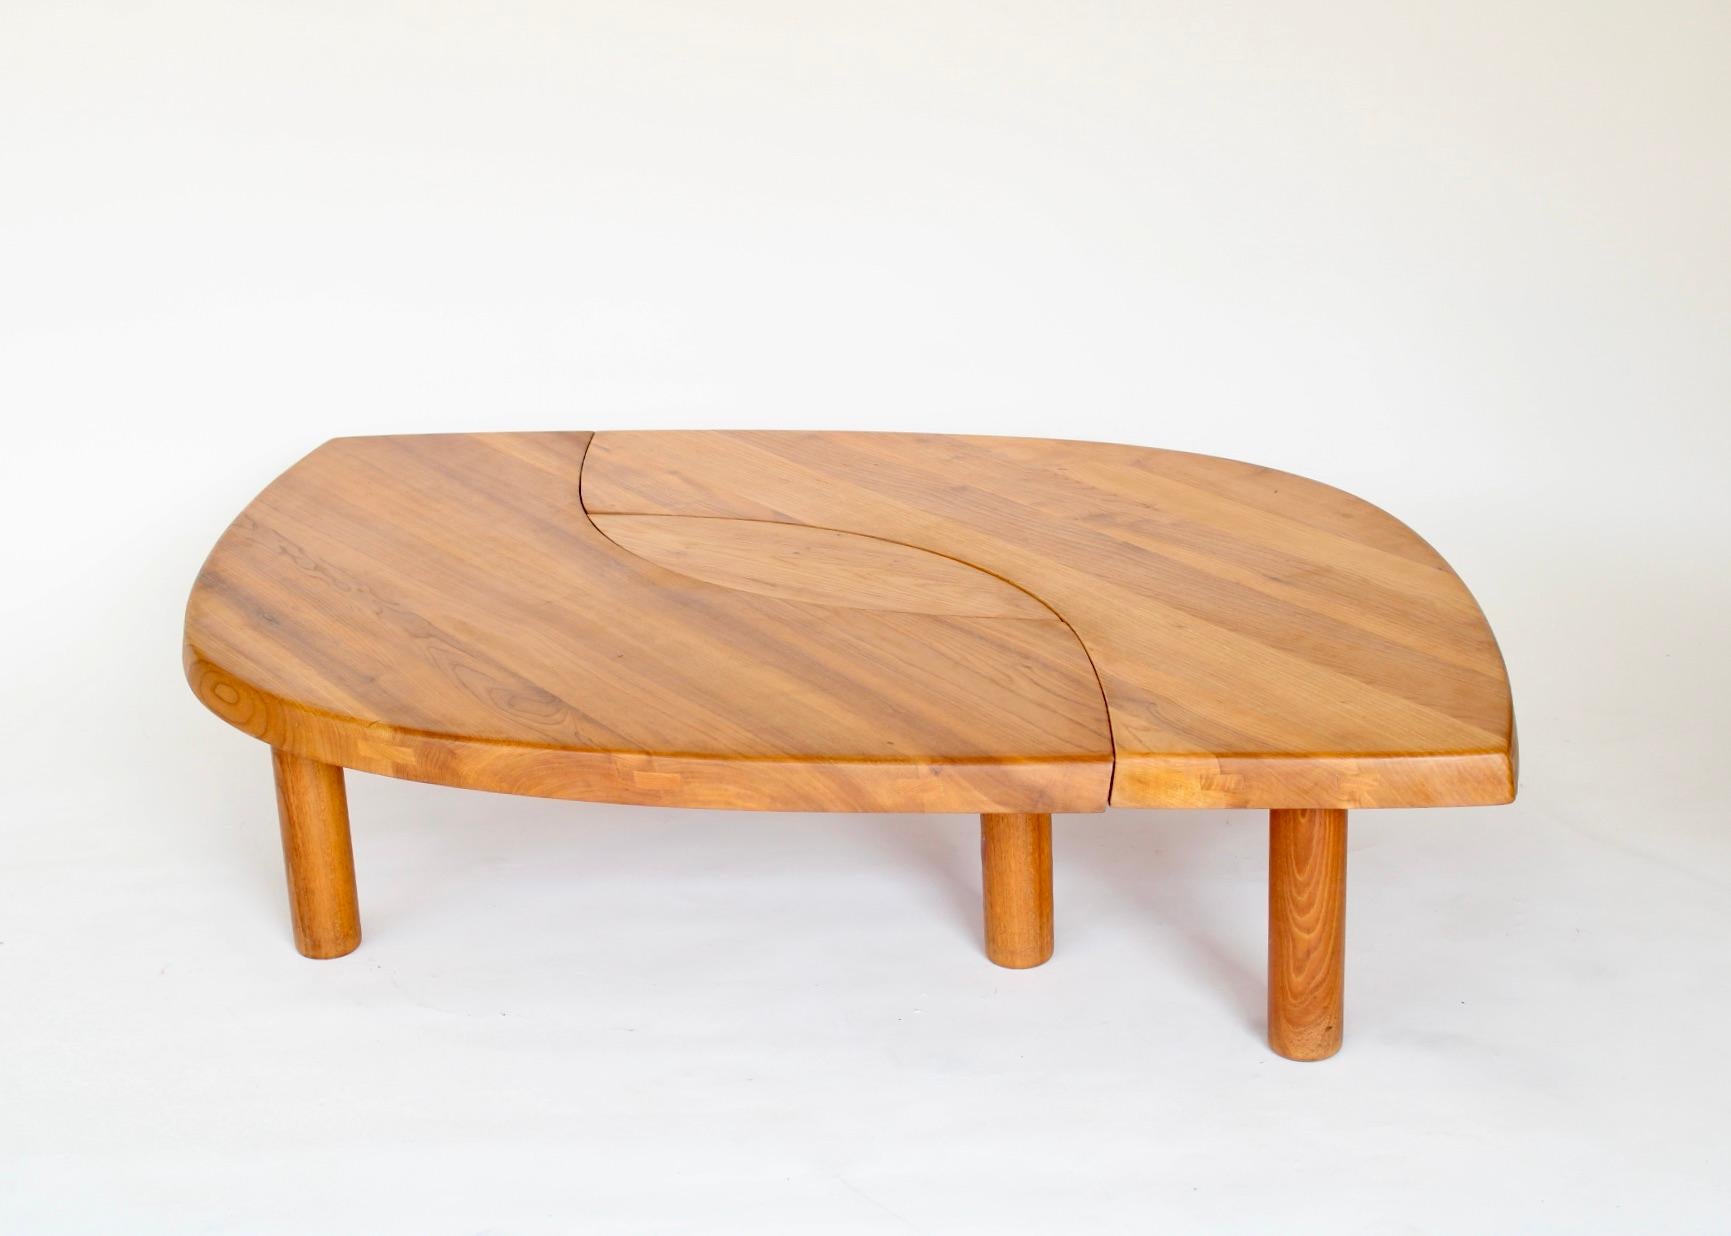 Pierre Chapo coffee table in elm wood, Model T22 C circa 1972.
This is a fine vintage example, not the current production. 
Excellent condition. Small eye piece stamped with the number 4 on each strut. 
Pierre Chapo was born in a family of